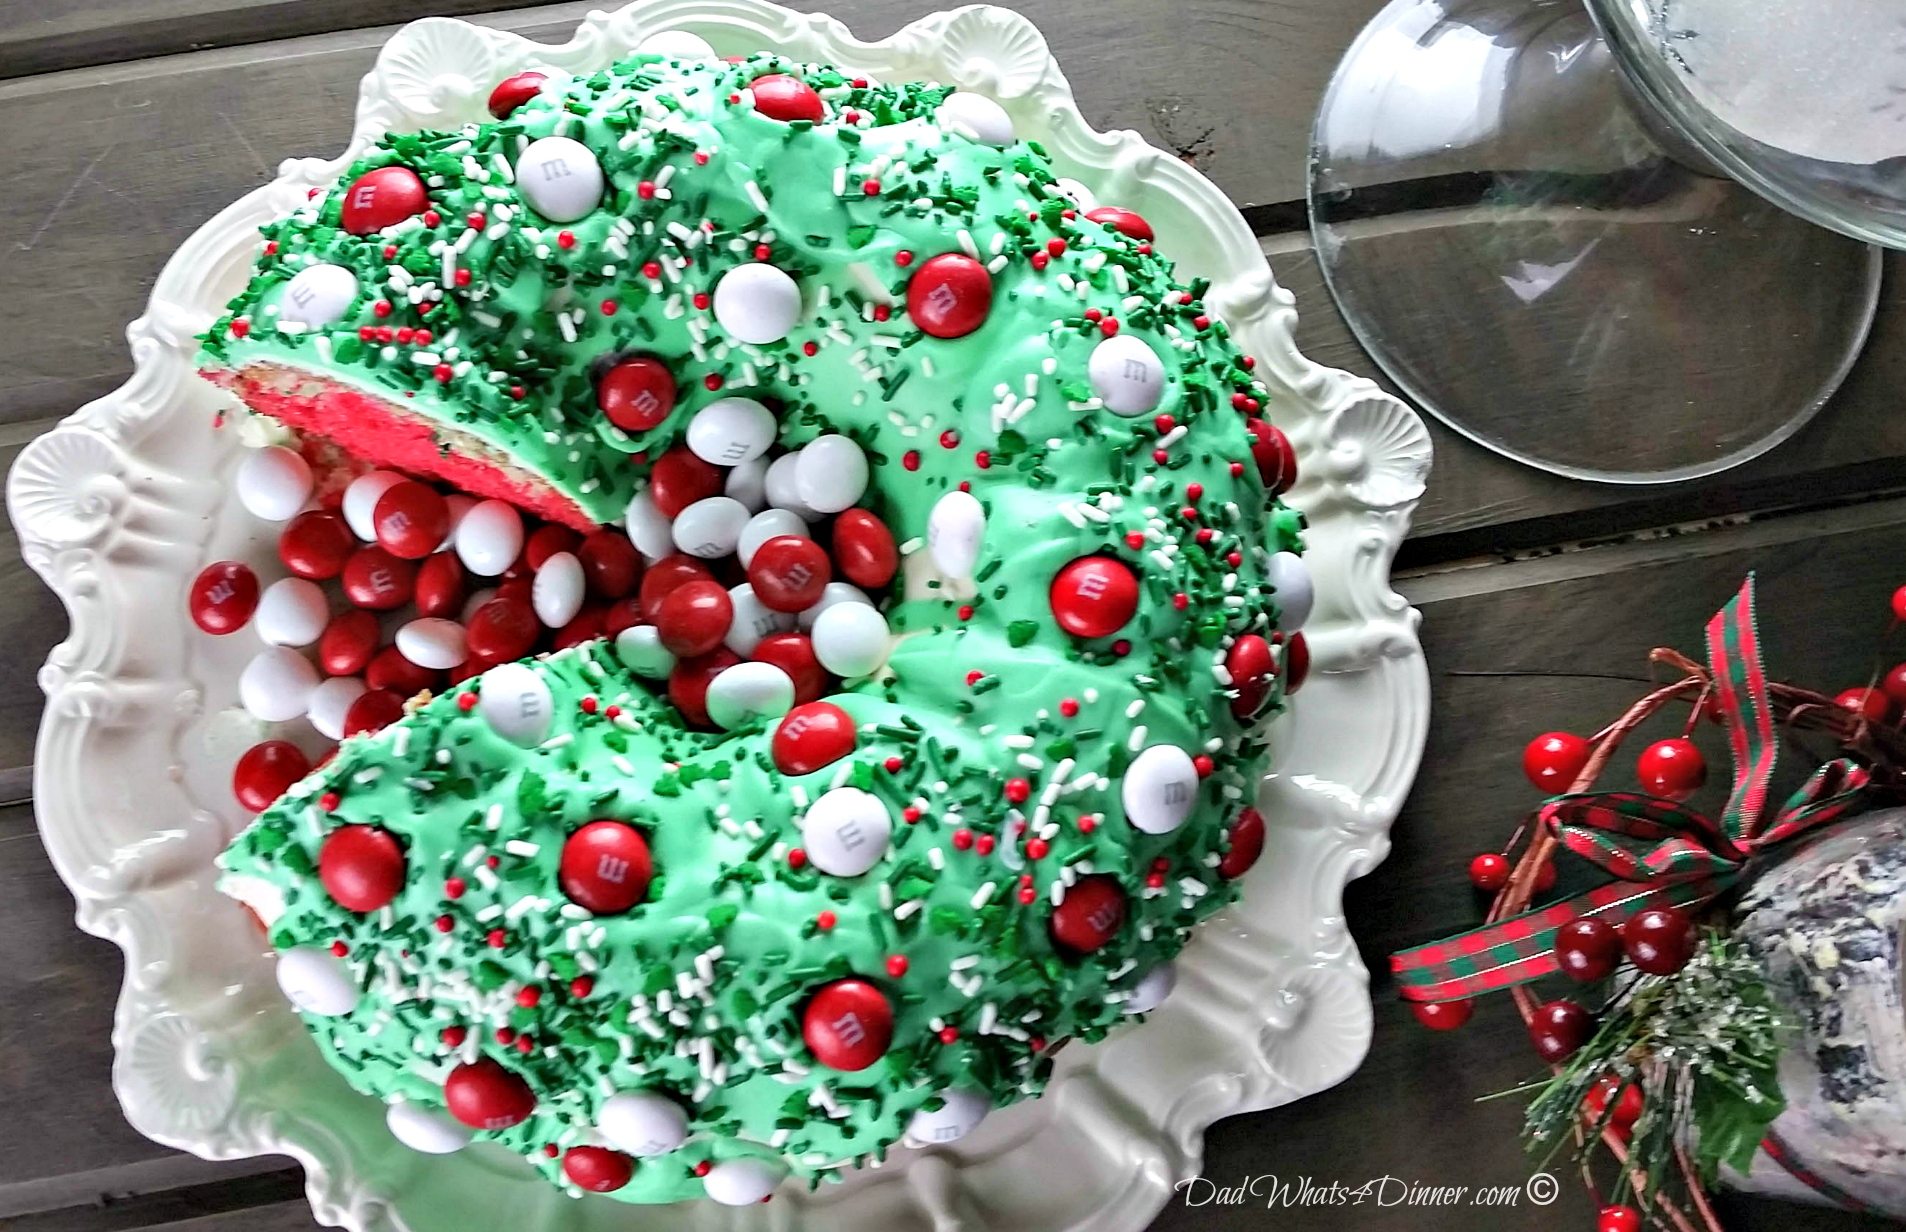 Christmas M&M's® Bundt Cake is the perfect dessert for all of your Holiday gatherings.. Kids and adults will love this festive cake..